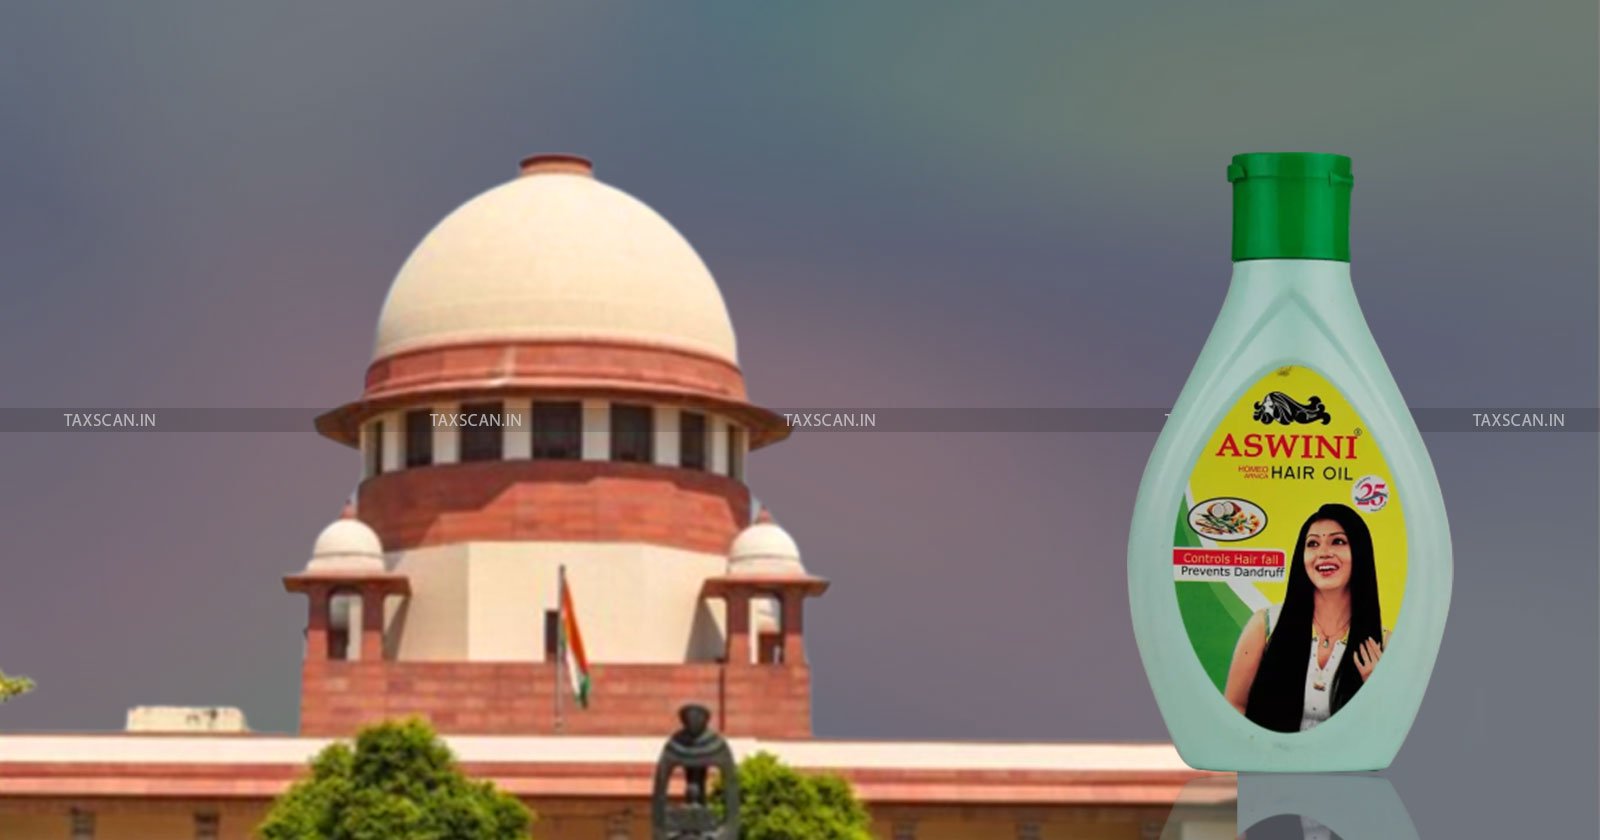 Aswini Homeo Arnica Hair Oil - medicament - CETA - Supreme Court of India - Broad-Basing of Entries - Entries under CETA - Justify Re-Classification - taxscan